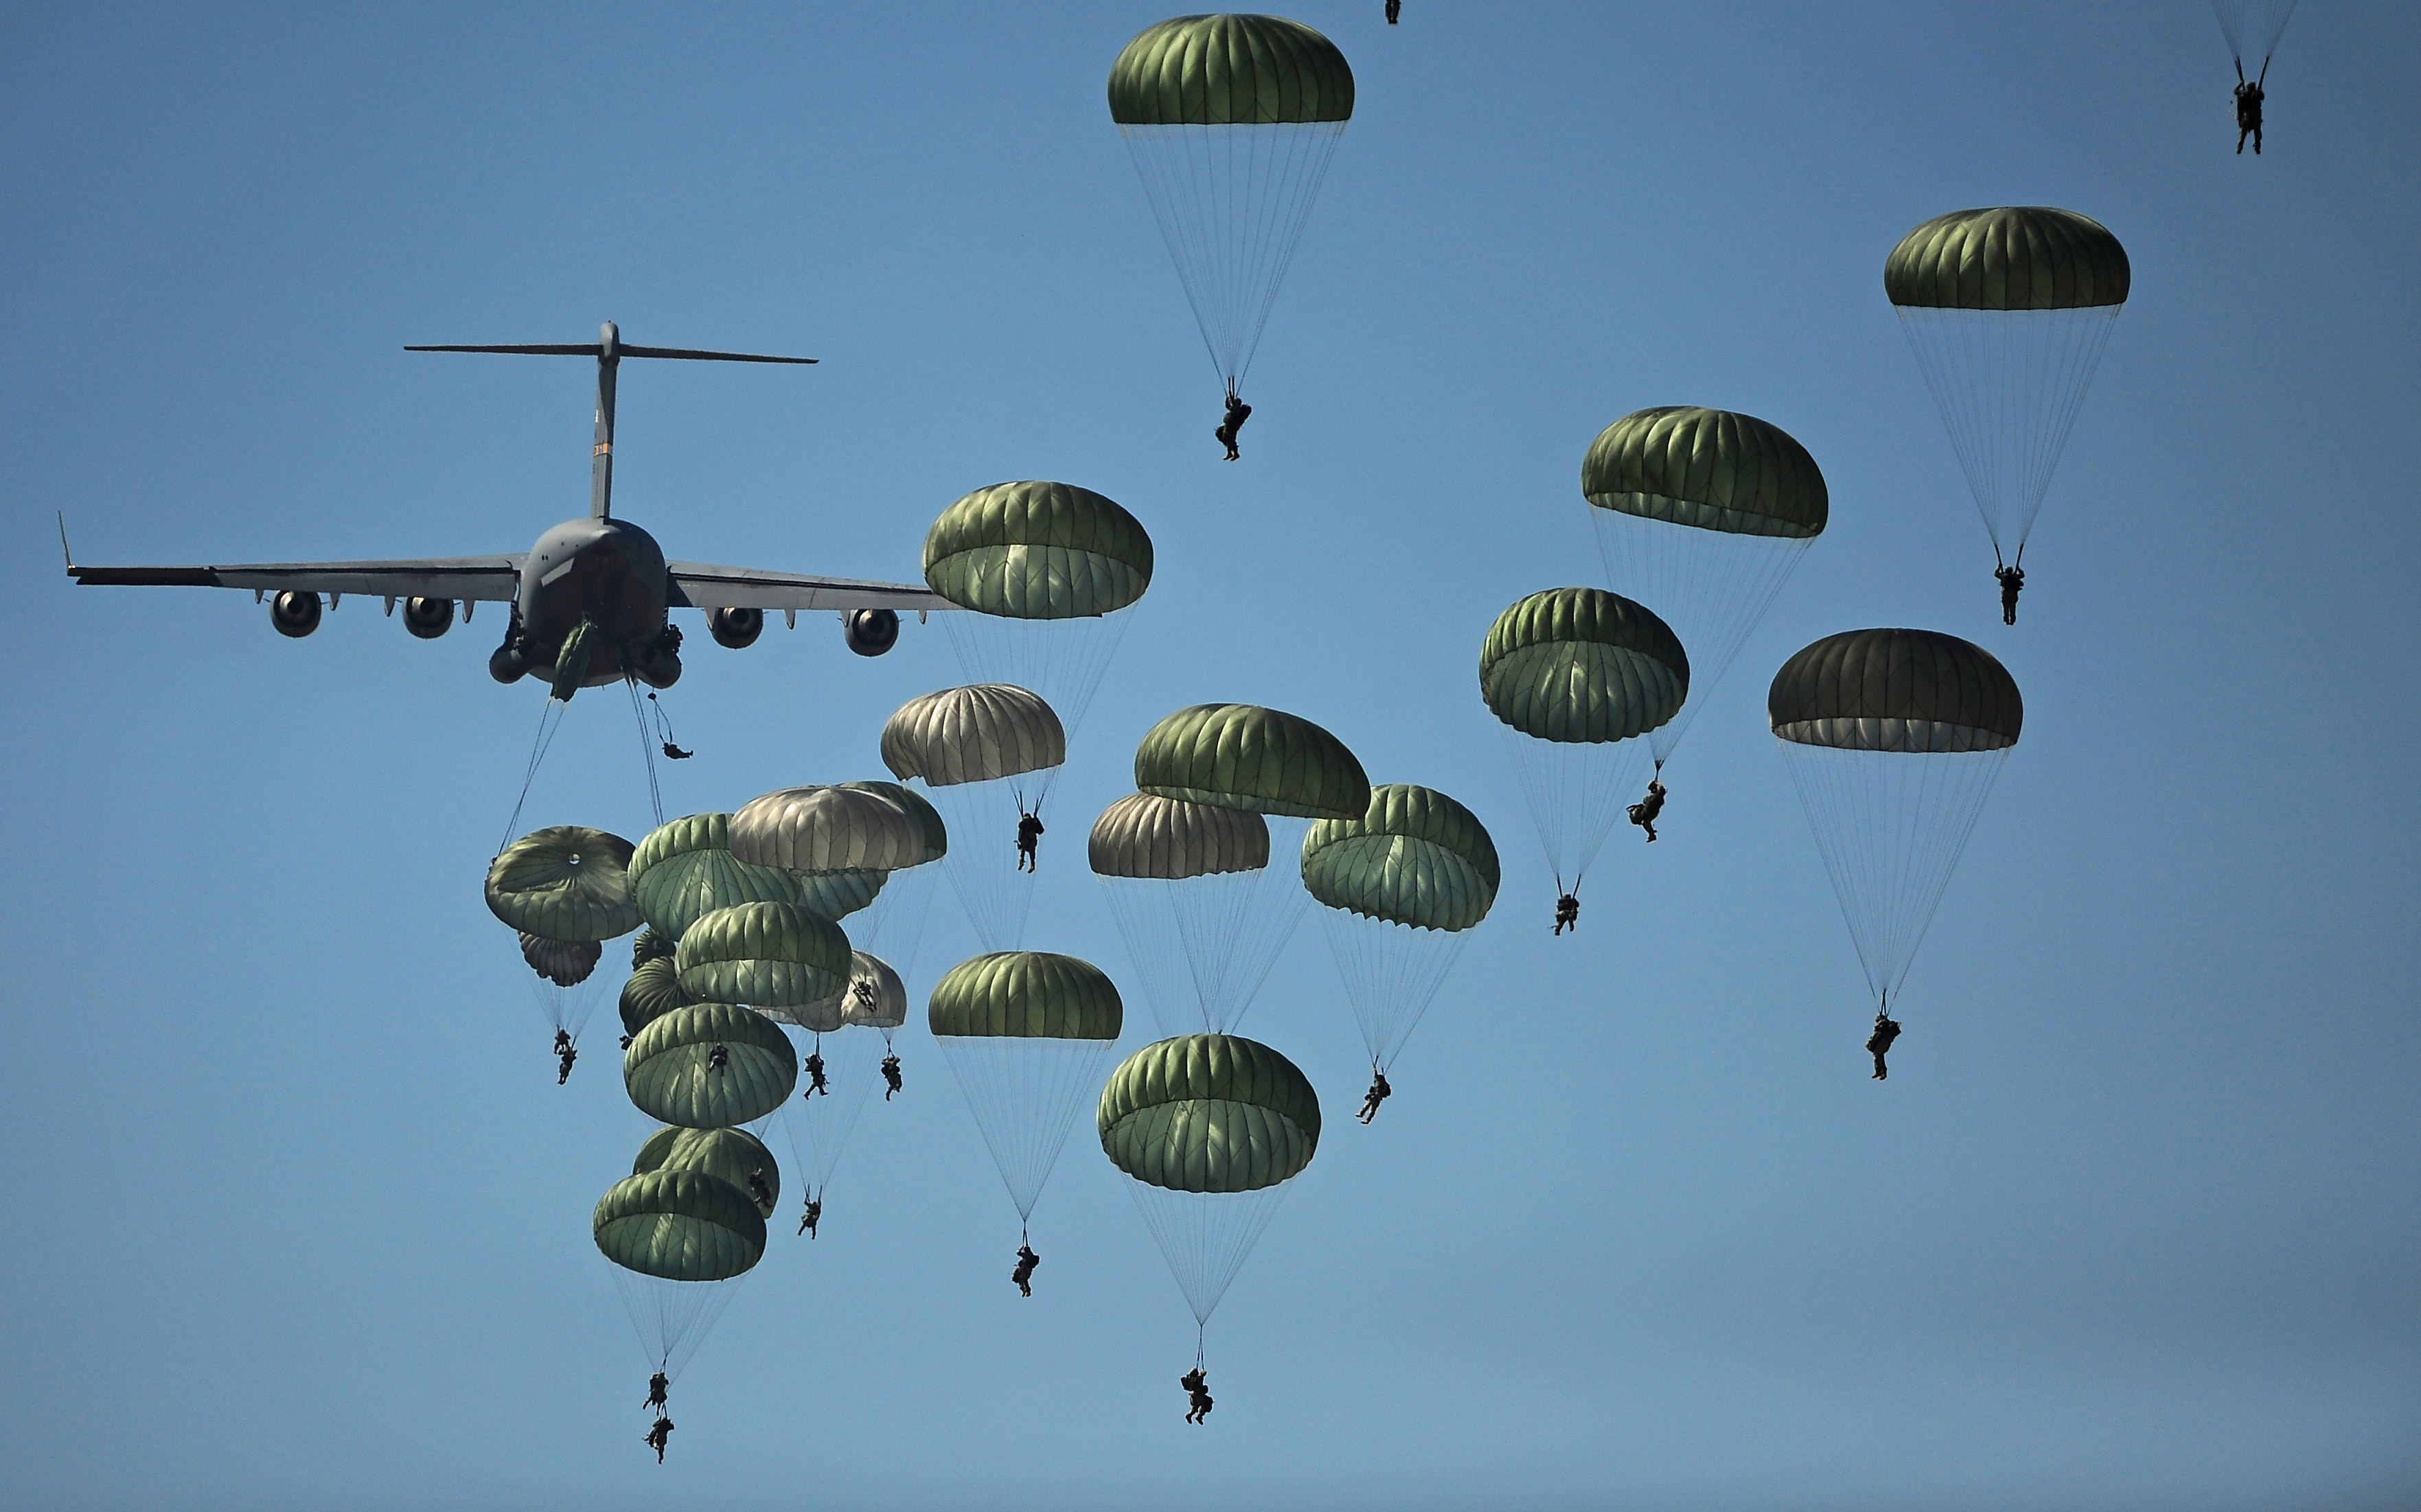 File:Defense.gov News Photo 110910-GO452-406 - U.S. Army paratroopers from the 82nd Airborne ...